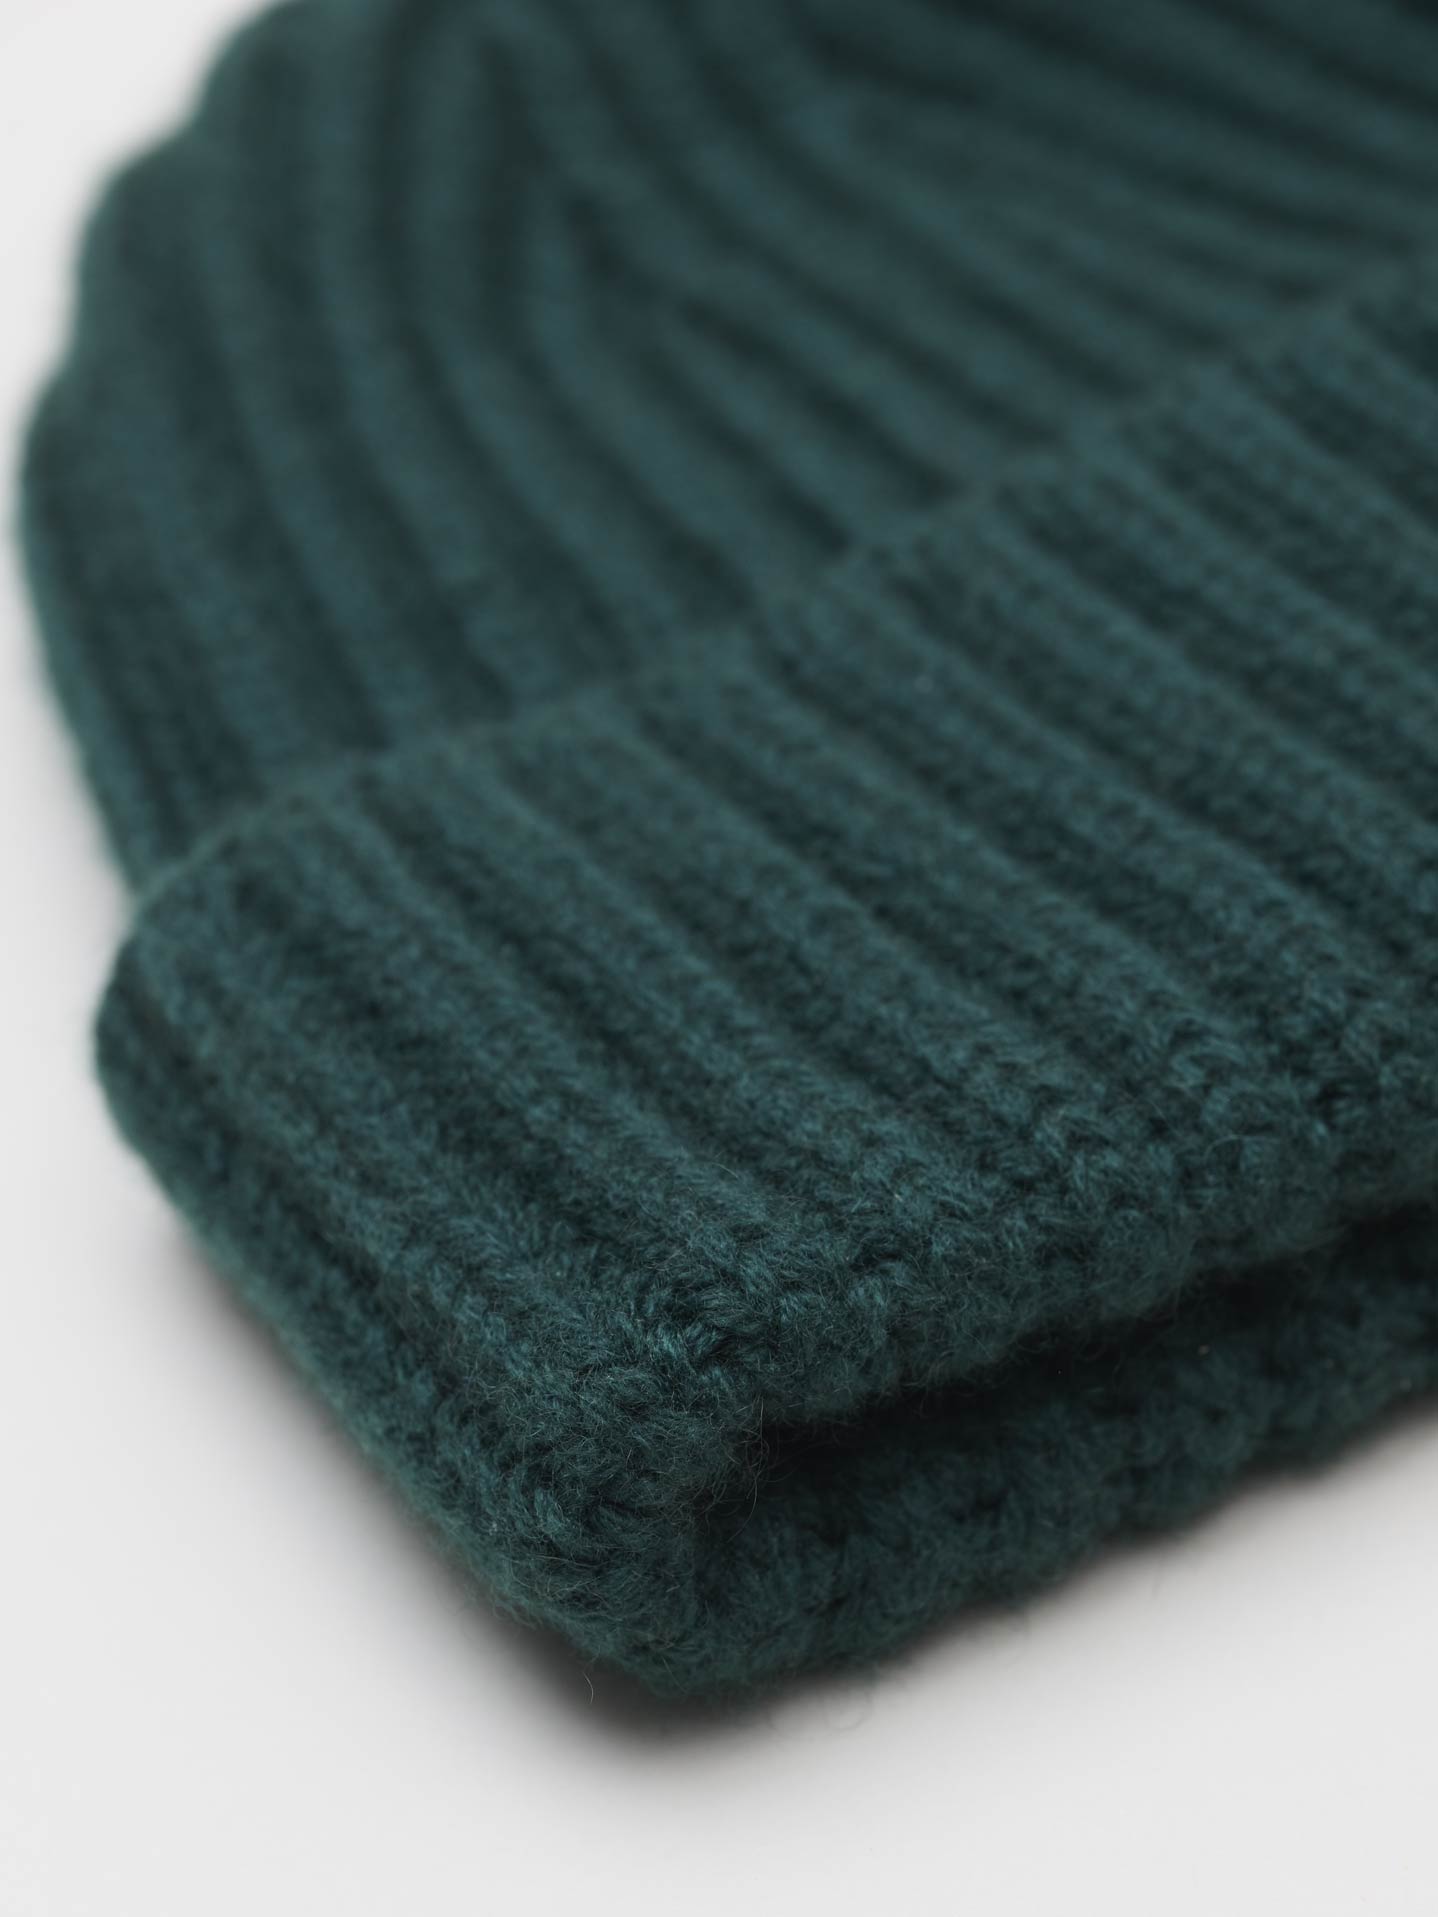 Cashmere Ribbed Knit Beanie, Green